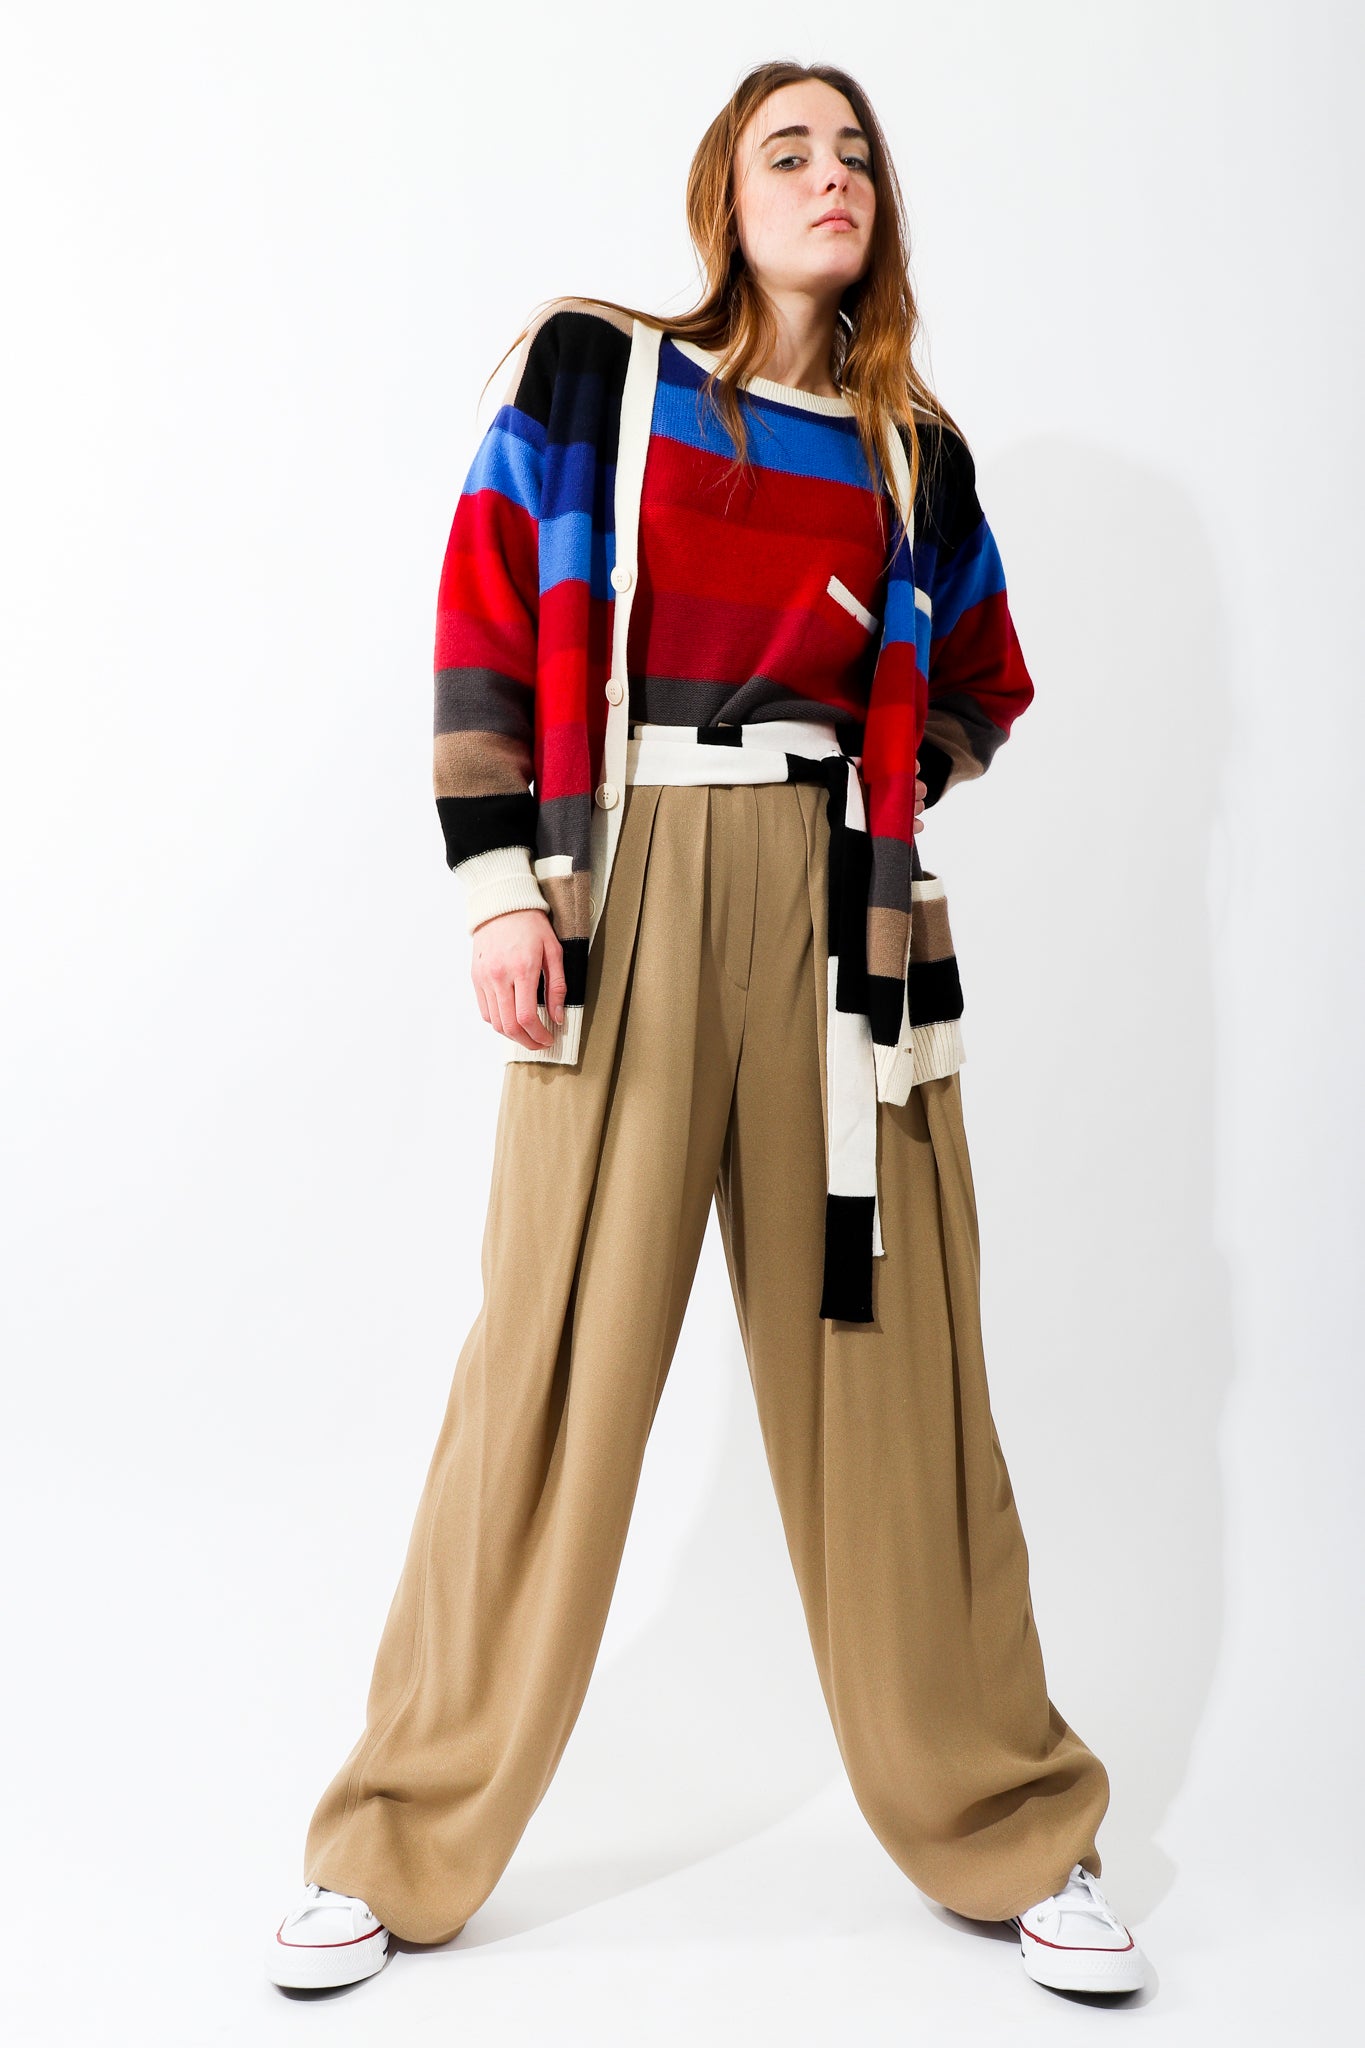 Girl wearing Vintage Sonia Rykiel Ombré Striped Knit Cardigan and sweater with taupe pant